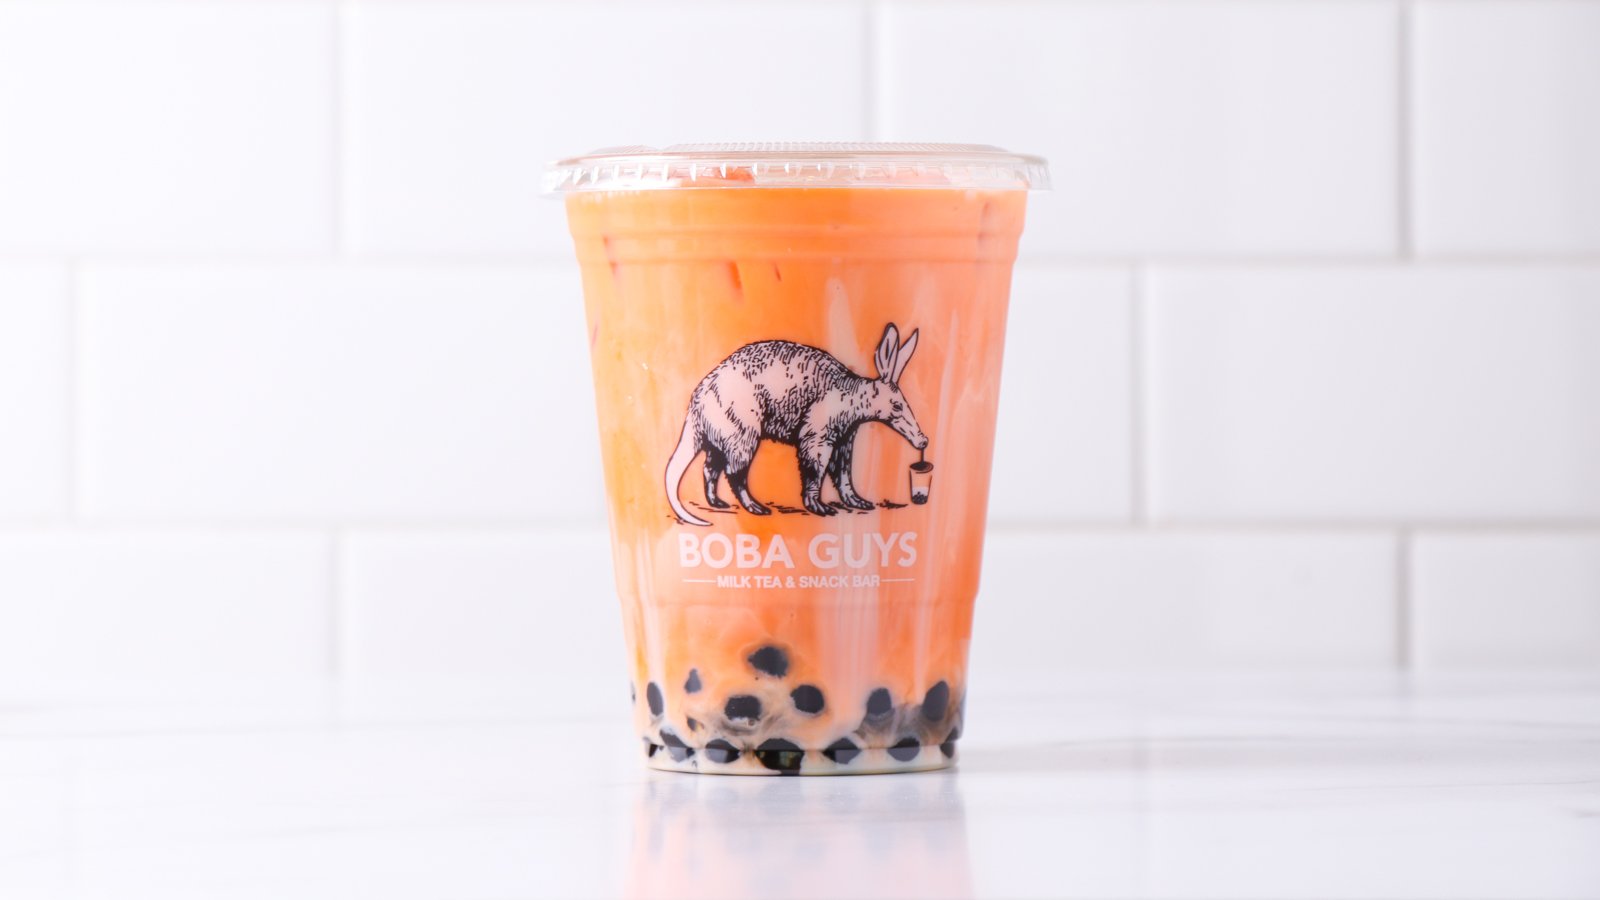 PLA — Boba Guys - Serving the highest quality bubble milk tea in